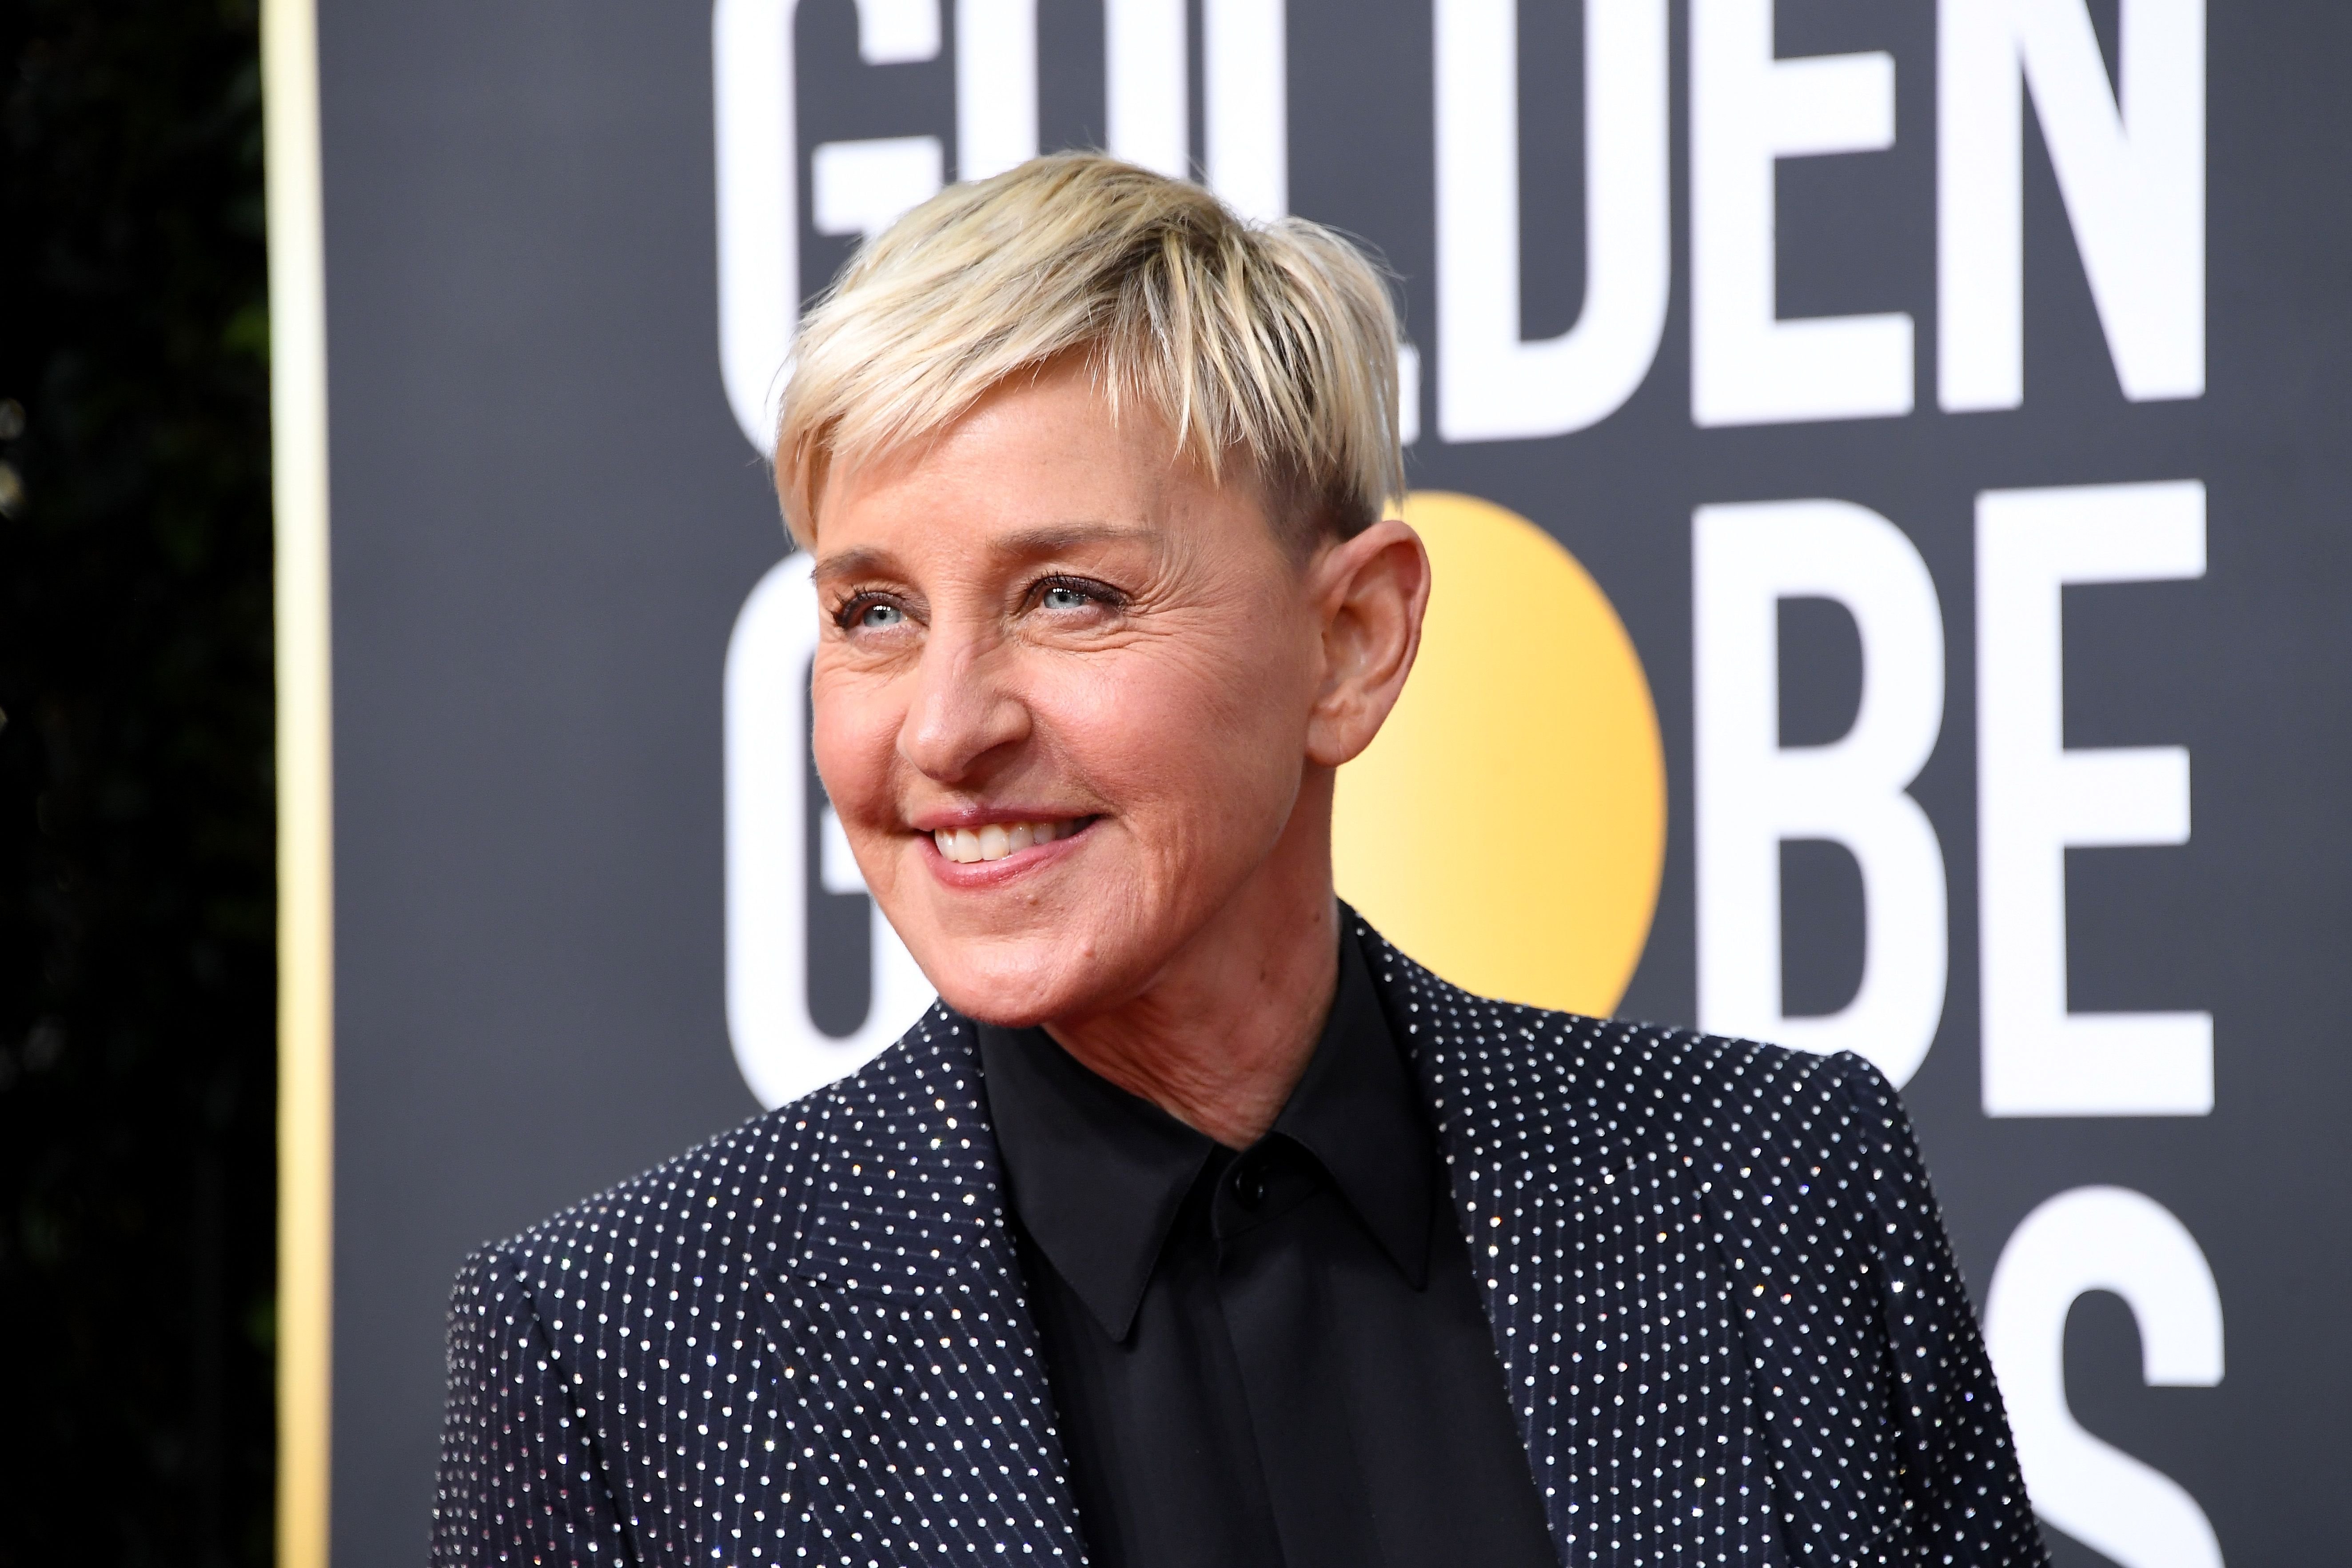 Ellen DeGeneres at the 77th Annual Golden Globe Awards at The Beverly Hilton Hotel on January 05, 2020 | Photo: Getty Images